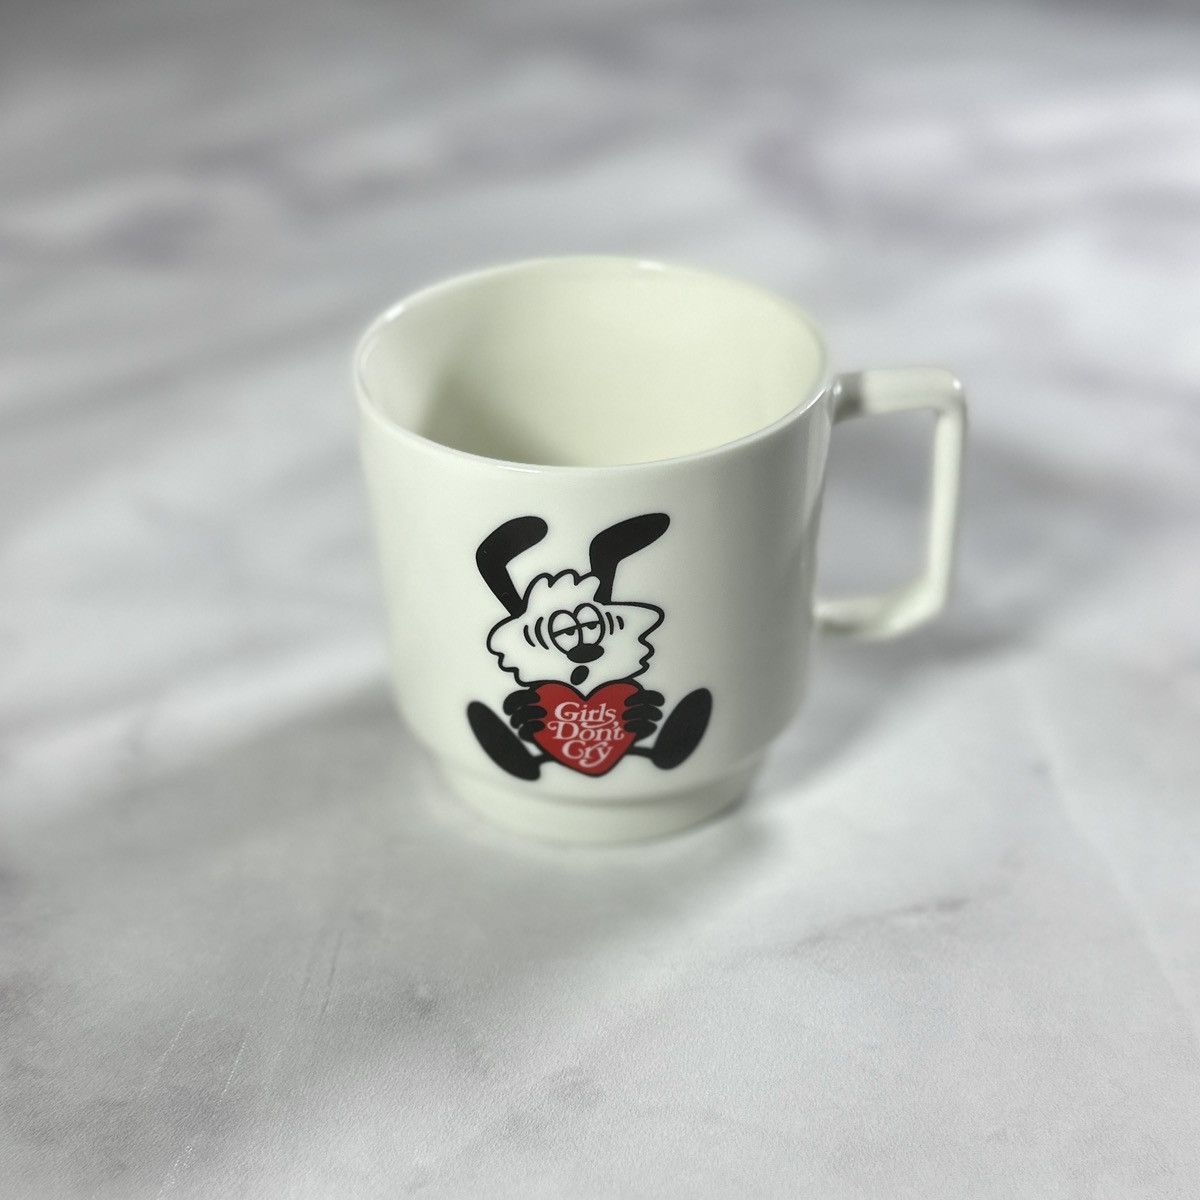 Girls Dont Cry “Meet Vick” by Verdy Girls Don't Cry Mug | Grailed